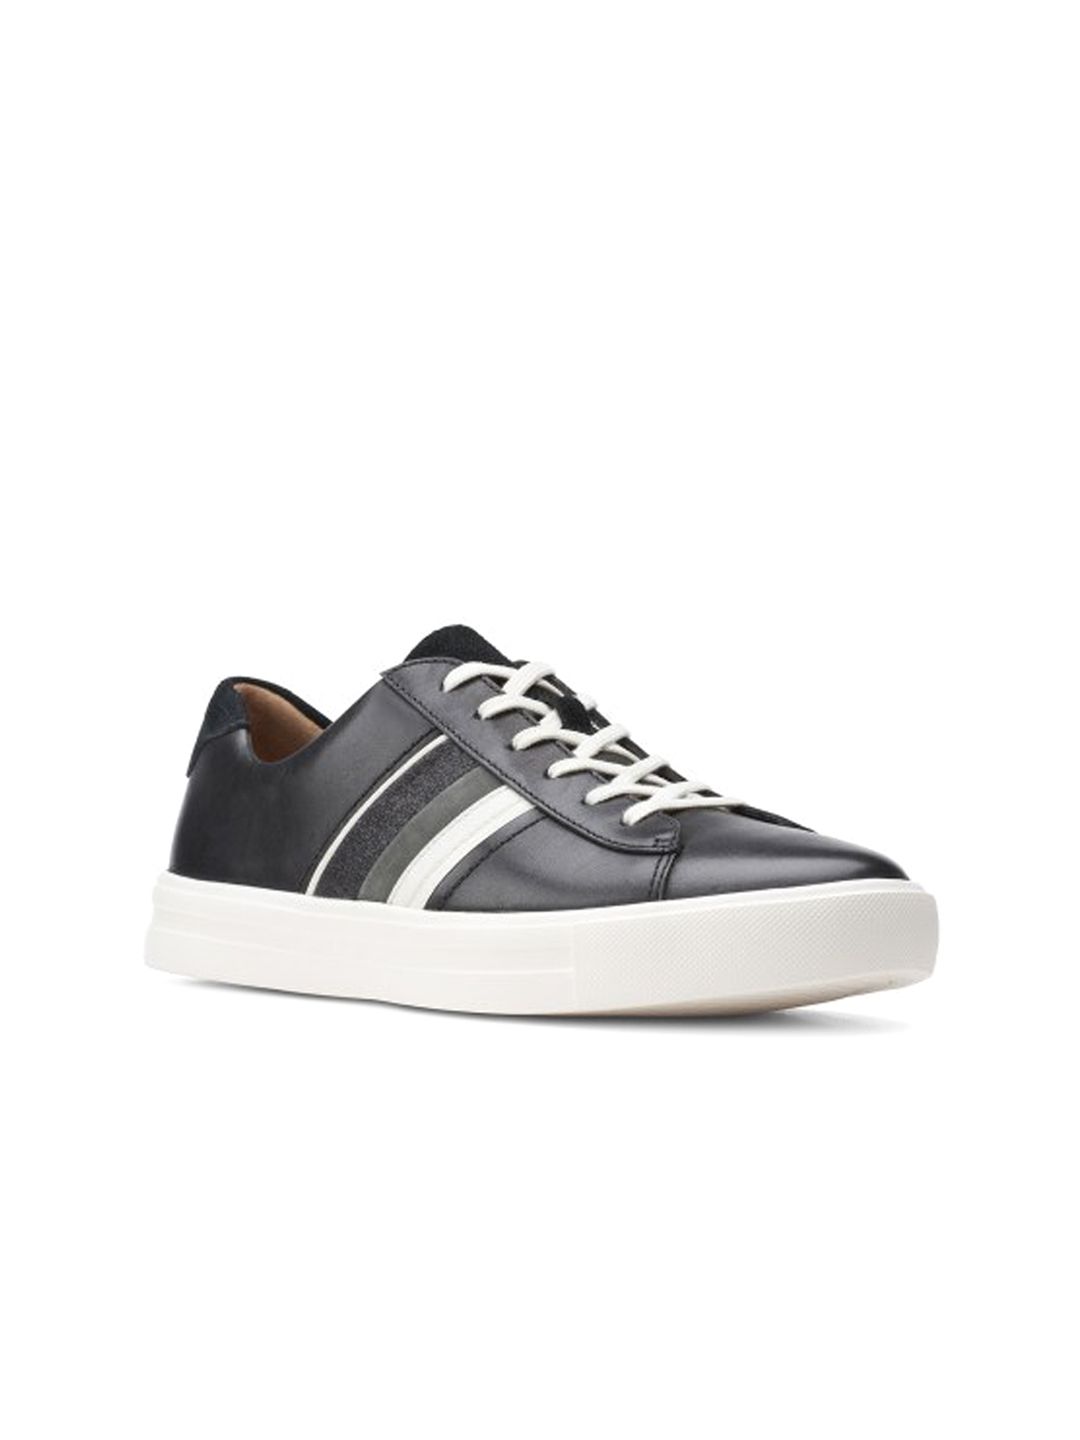 Clarks Women Black Colourblocked Leather Sneakers Price in India